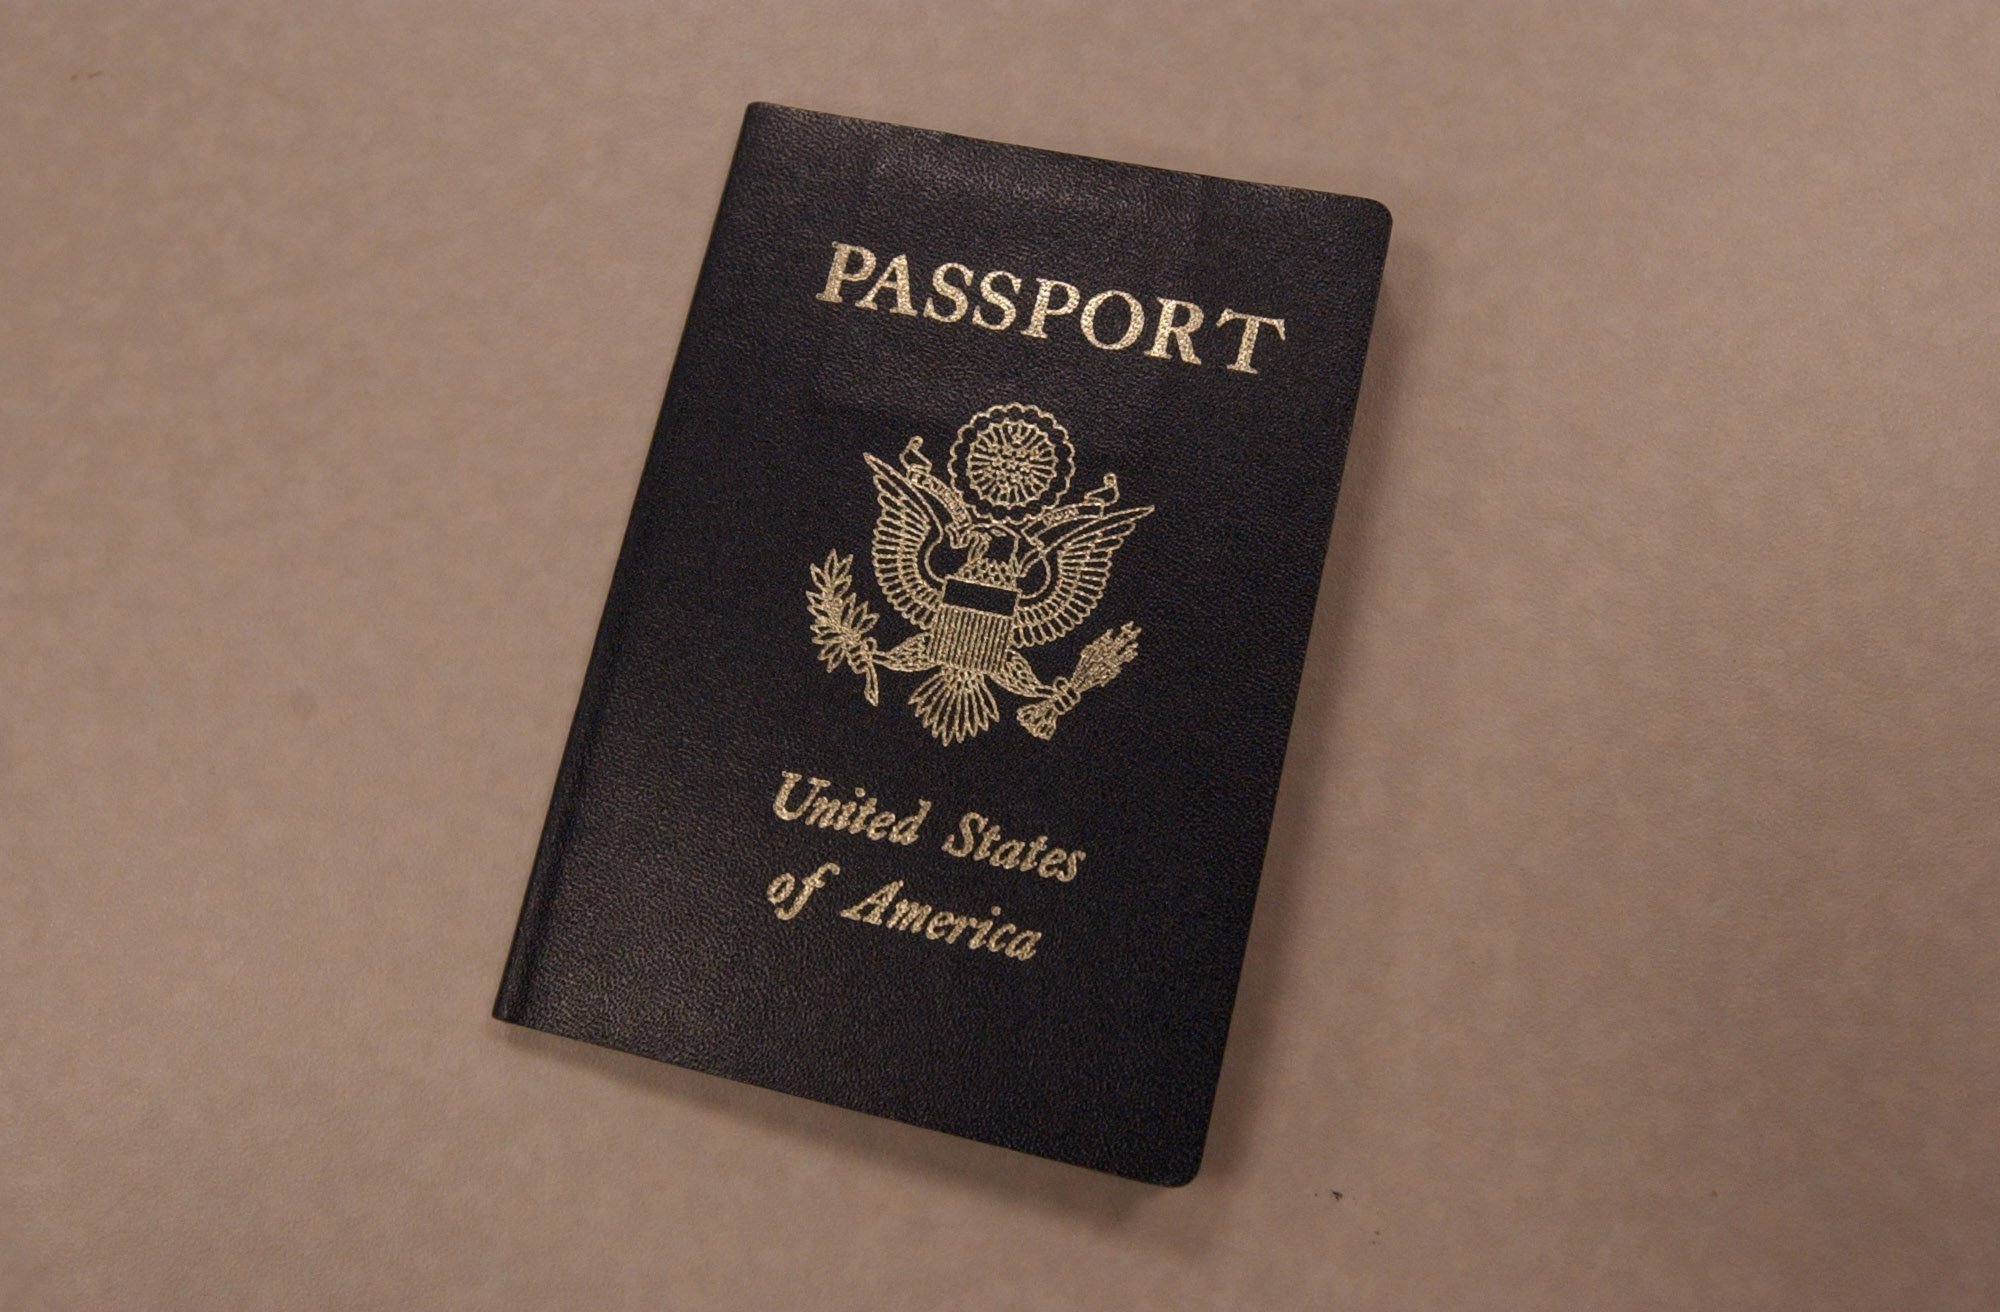 Passport Mark For Sex Offenders Law Challenged In Calif Court Chicago Tribune